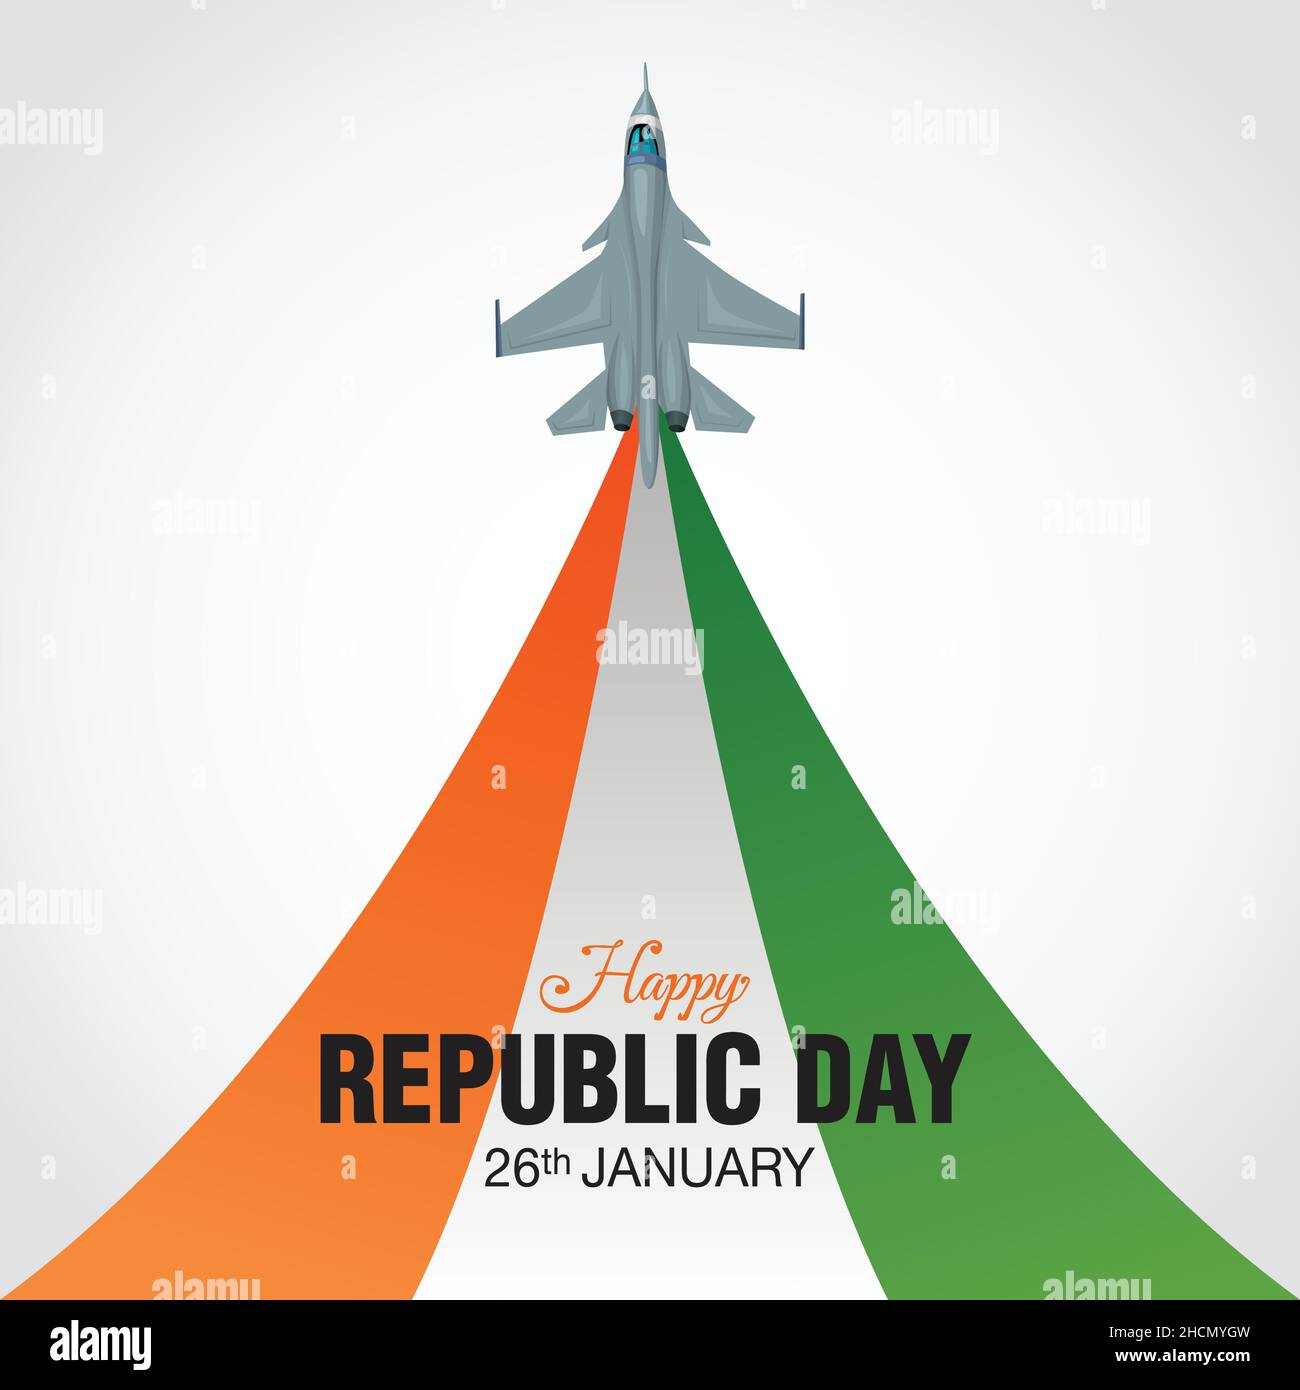 Happy Republic Day India concept with vector illustration of fighter jets and Indian flag colors, with white background. Stock Vector